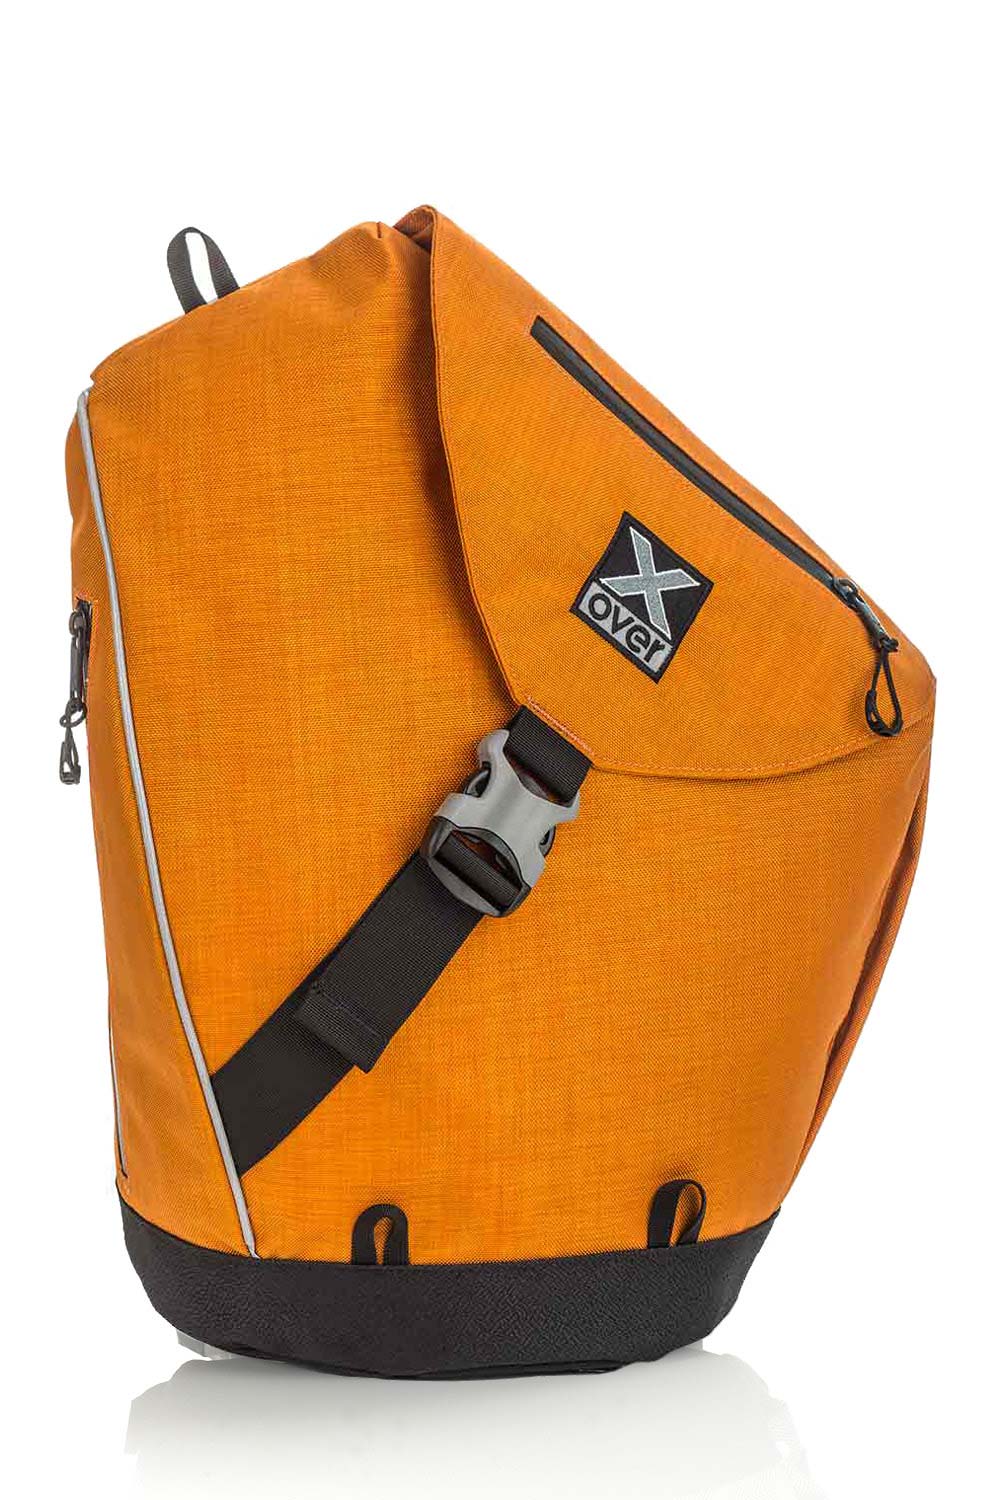 X Over Motor Sports Bag